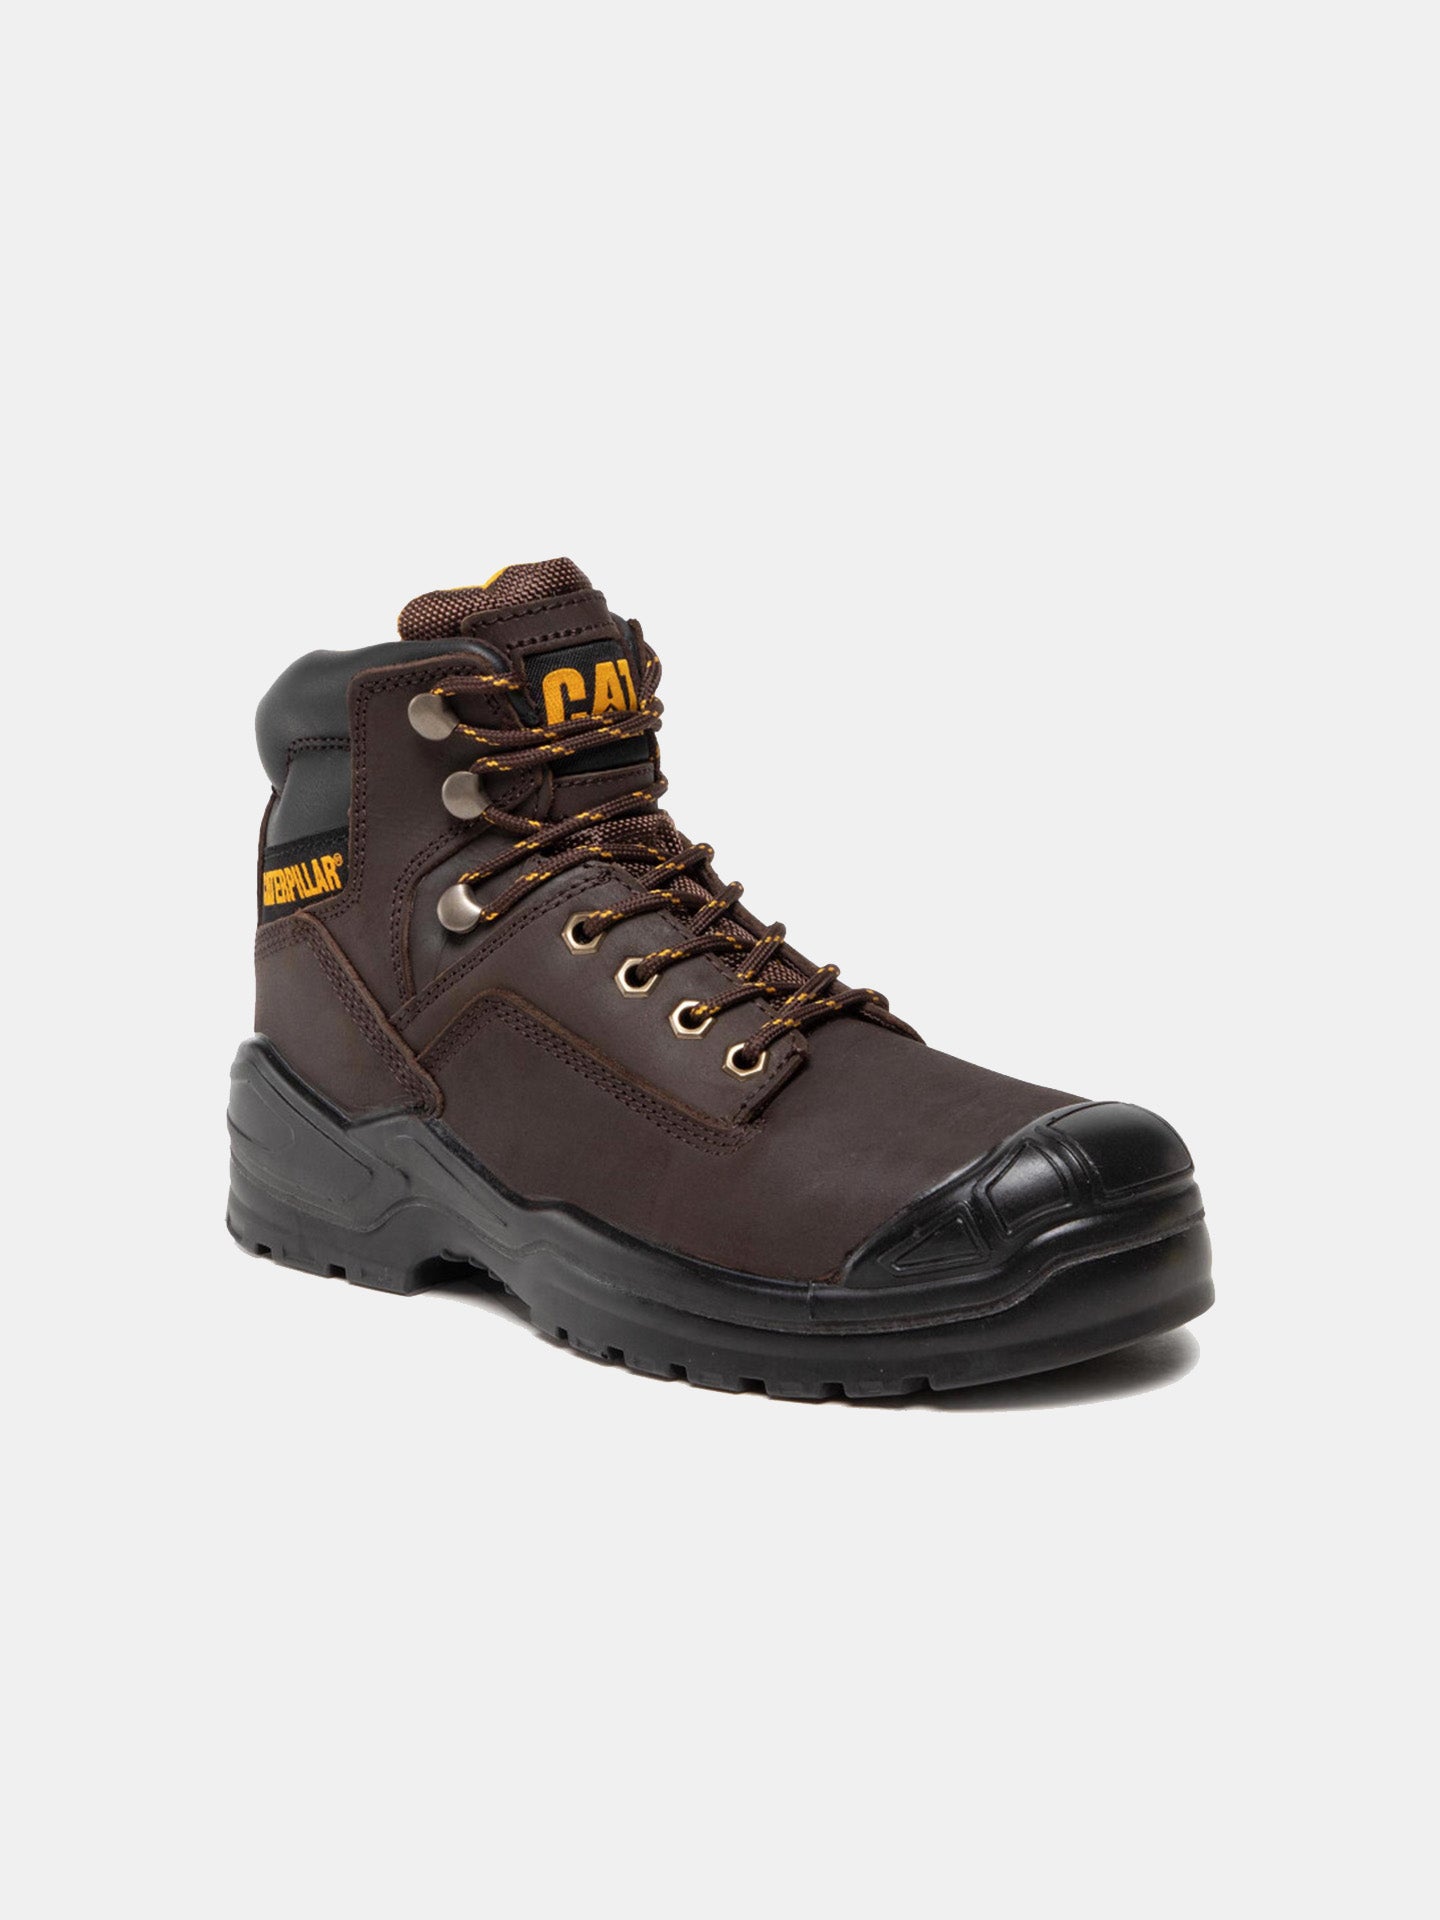 Caterpillar Men's Striver Bump St S3 Safety Boots #color_Brown